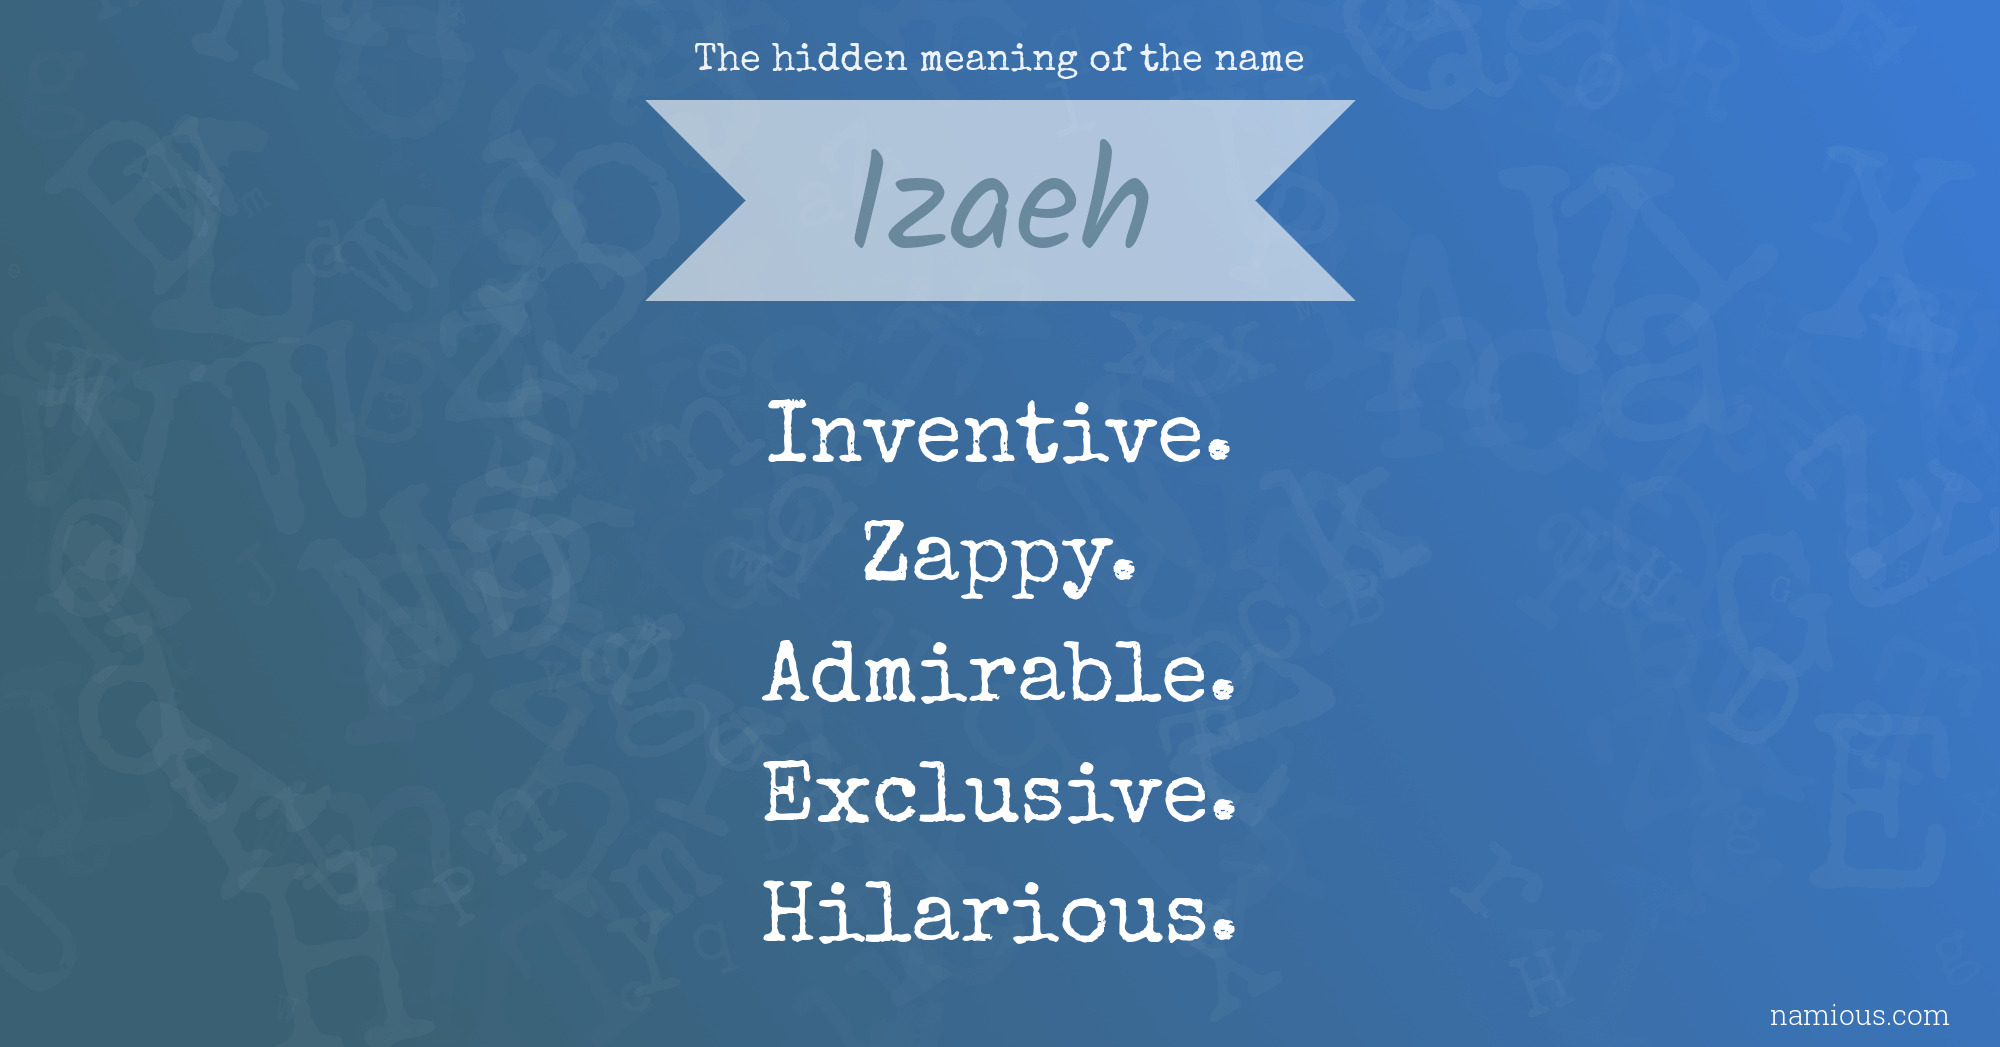 The hidden meaning of the name Izaeh